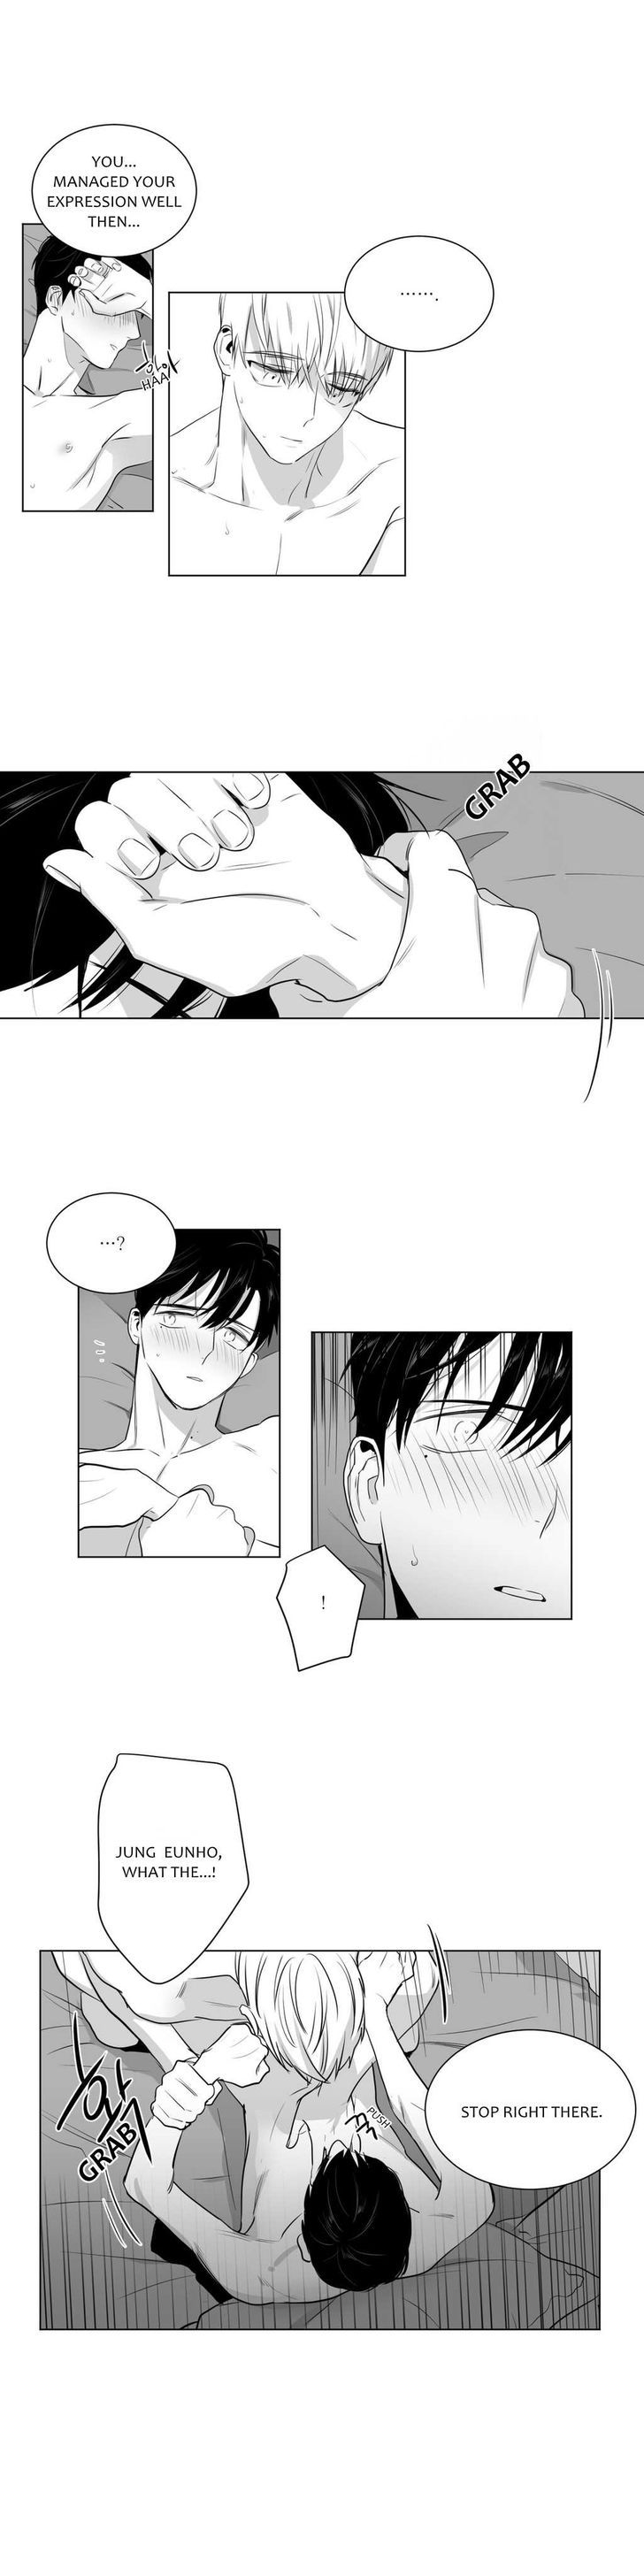 Lover Boy (Lezhin) Chapter 015 page 15